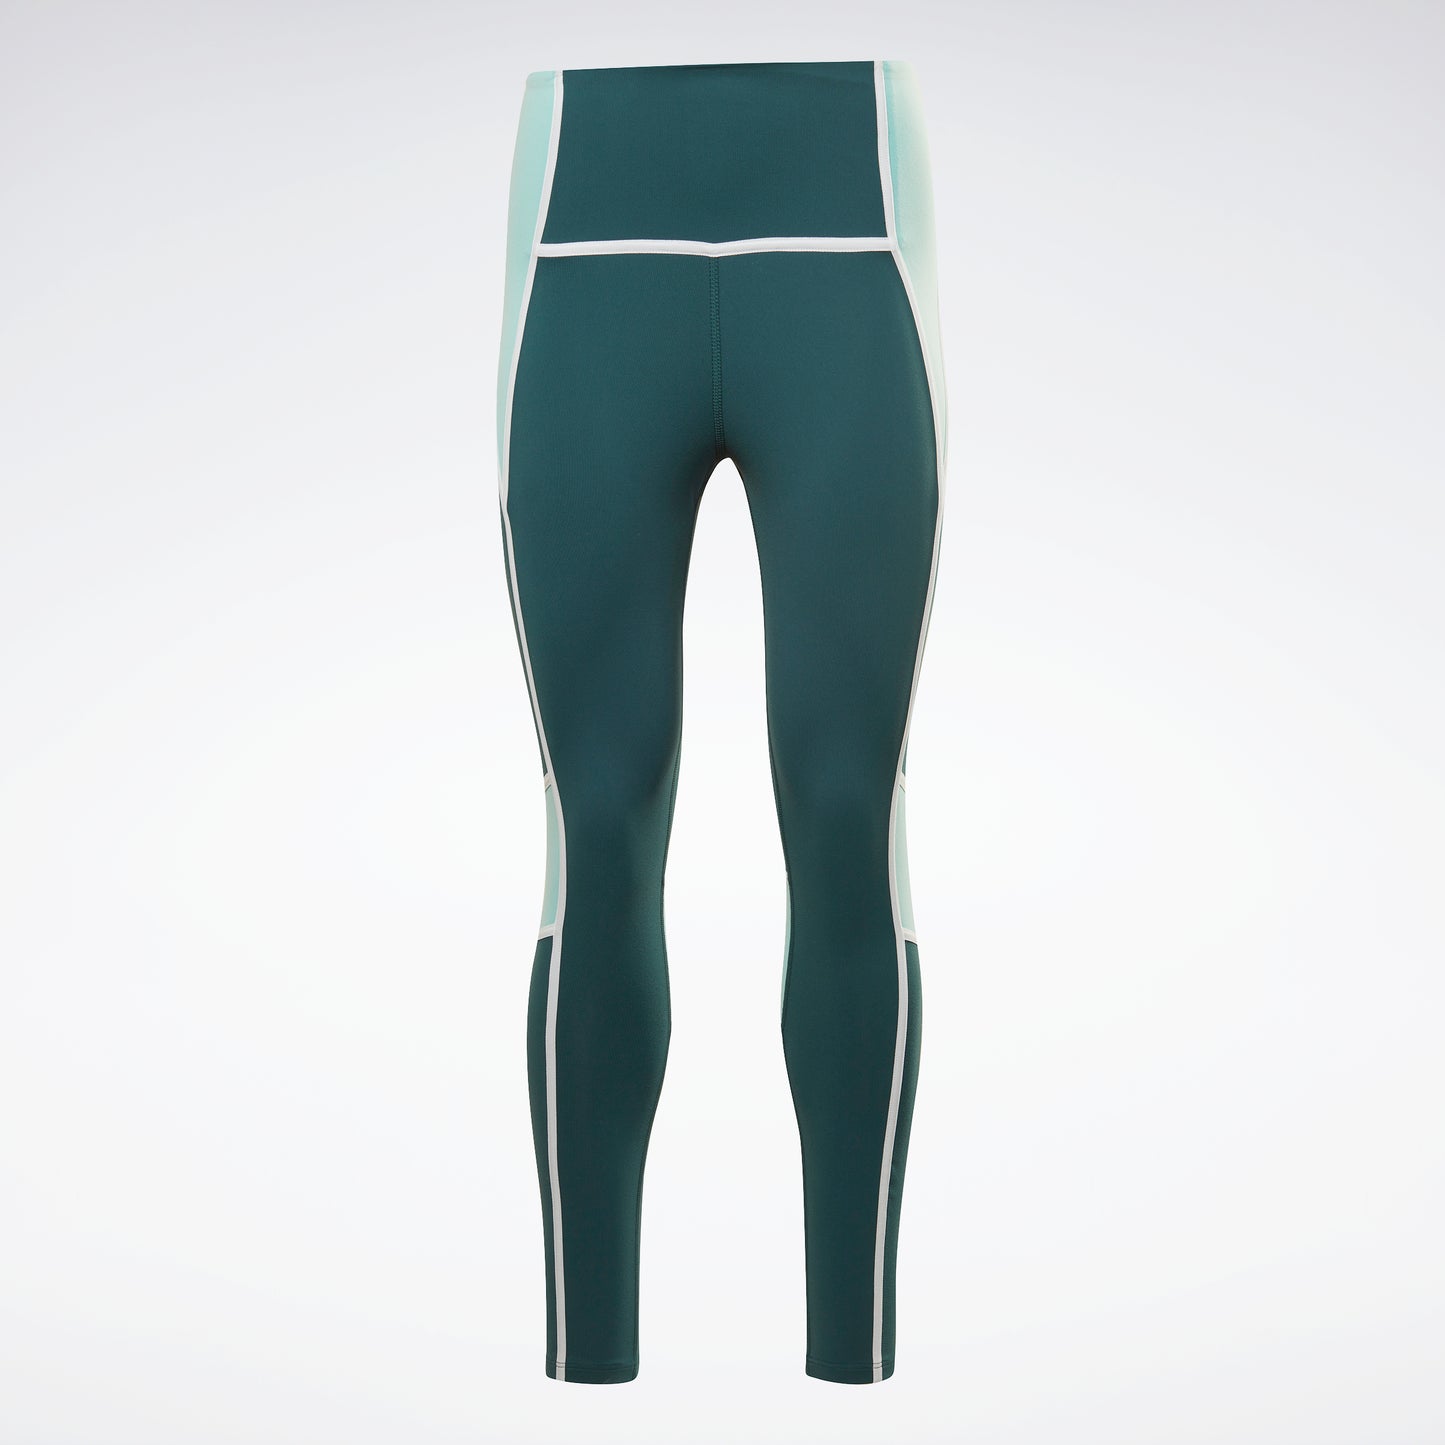  Reebok Women's CROSSFIT Compression Legging, Hunter Green,  X-Small : Clothing, Shoes & Jewelry